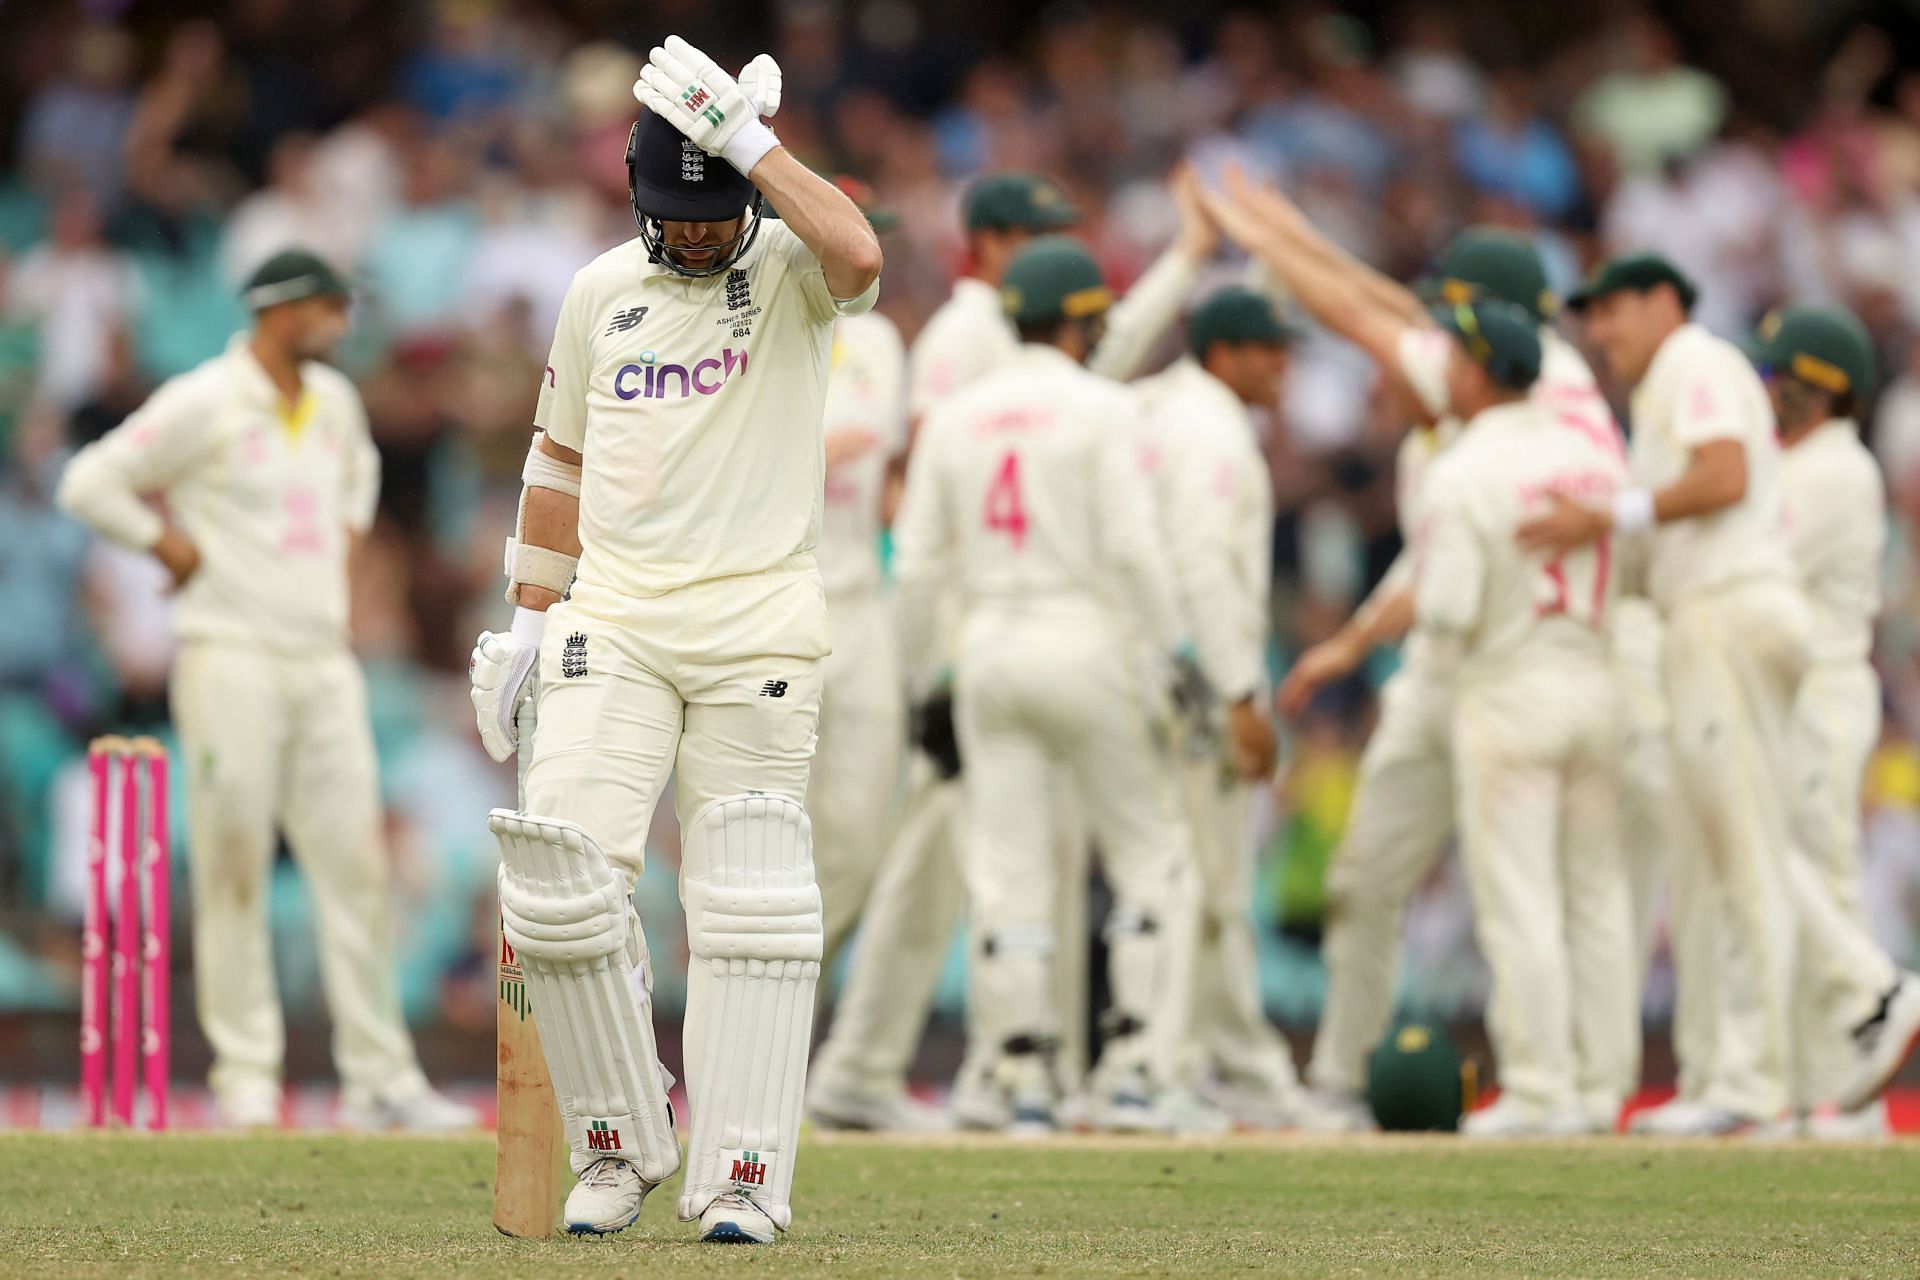 The fourth Ashes Test was a thrilling contest